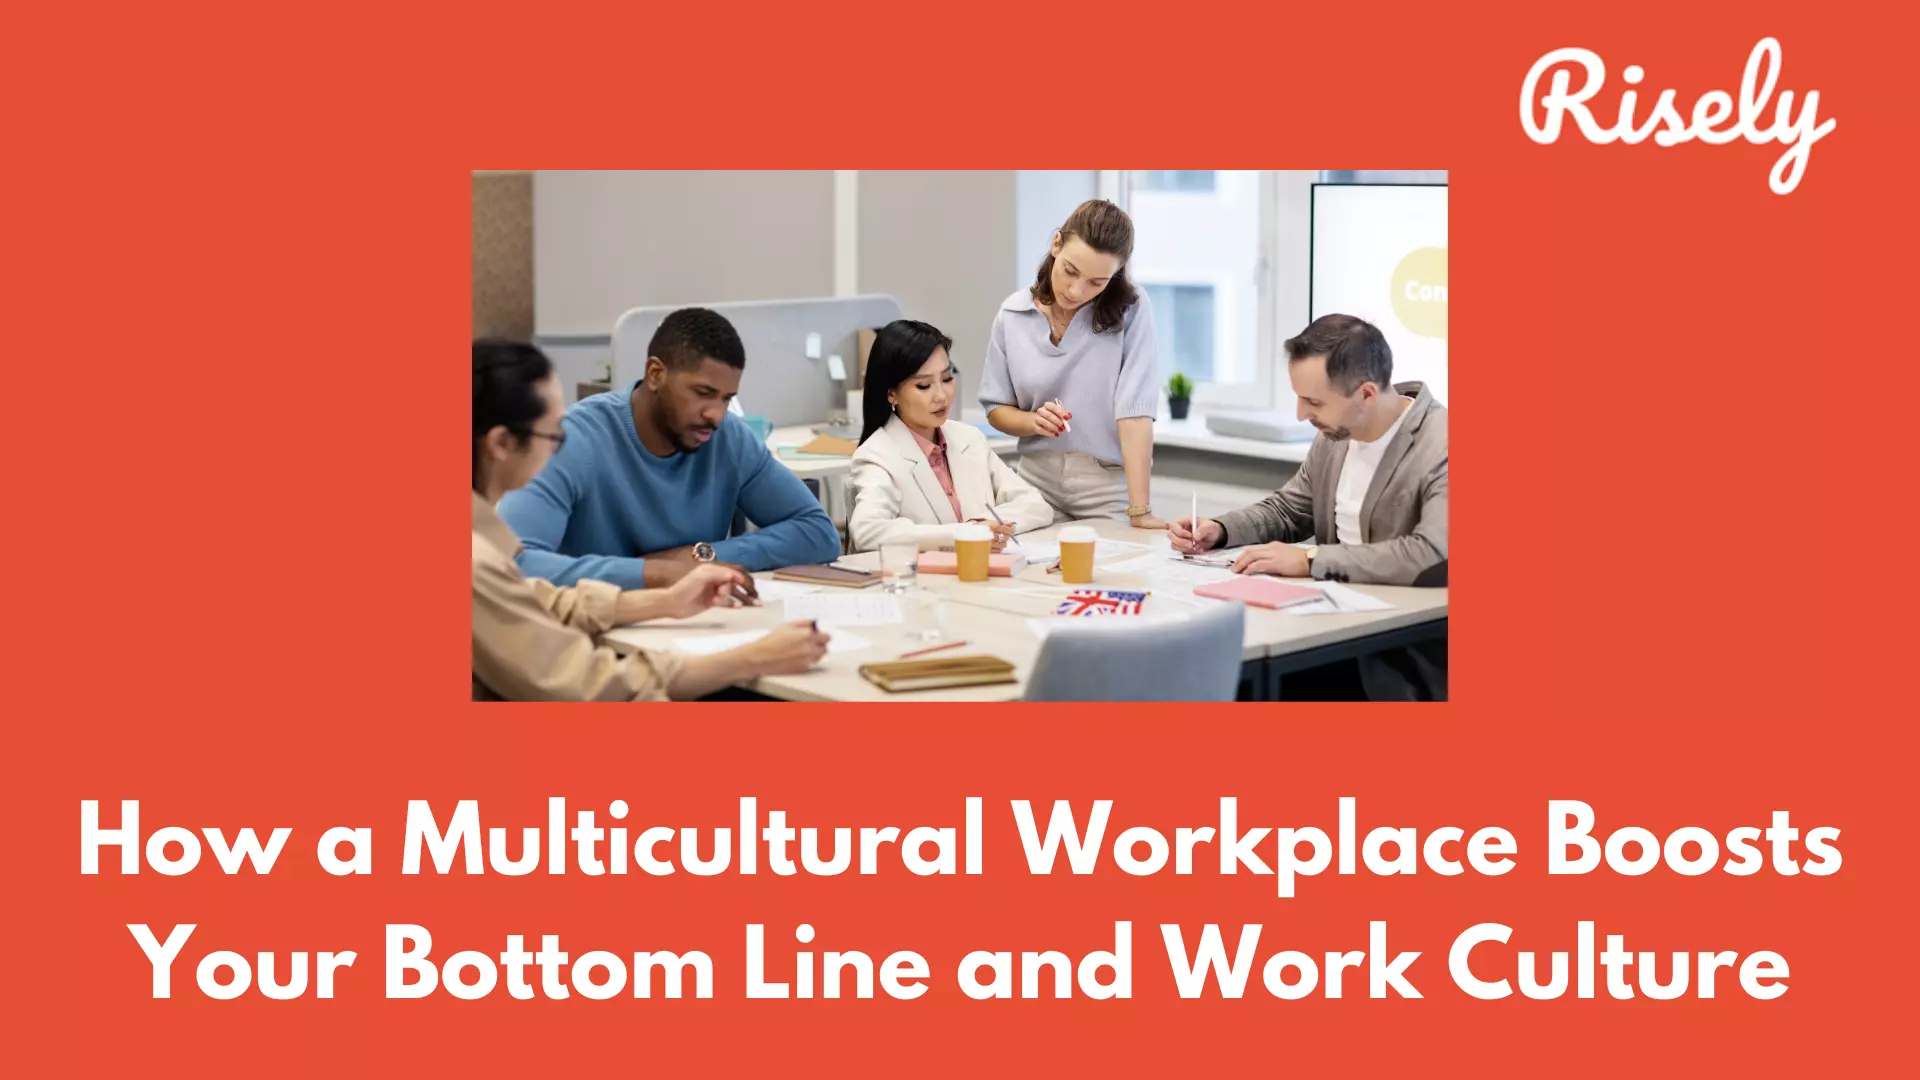 How a Multicultural Workplace Boosts Your Bottom Line and Work Culture